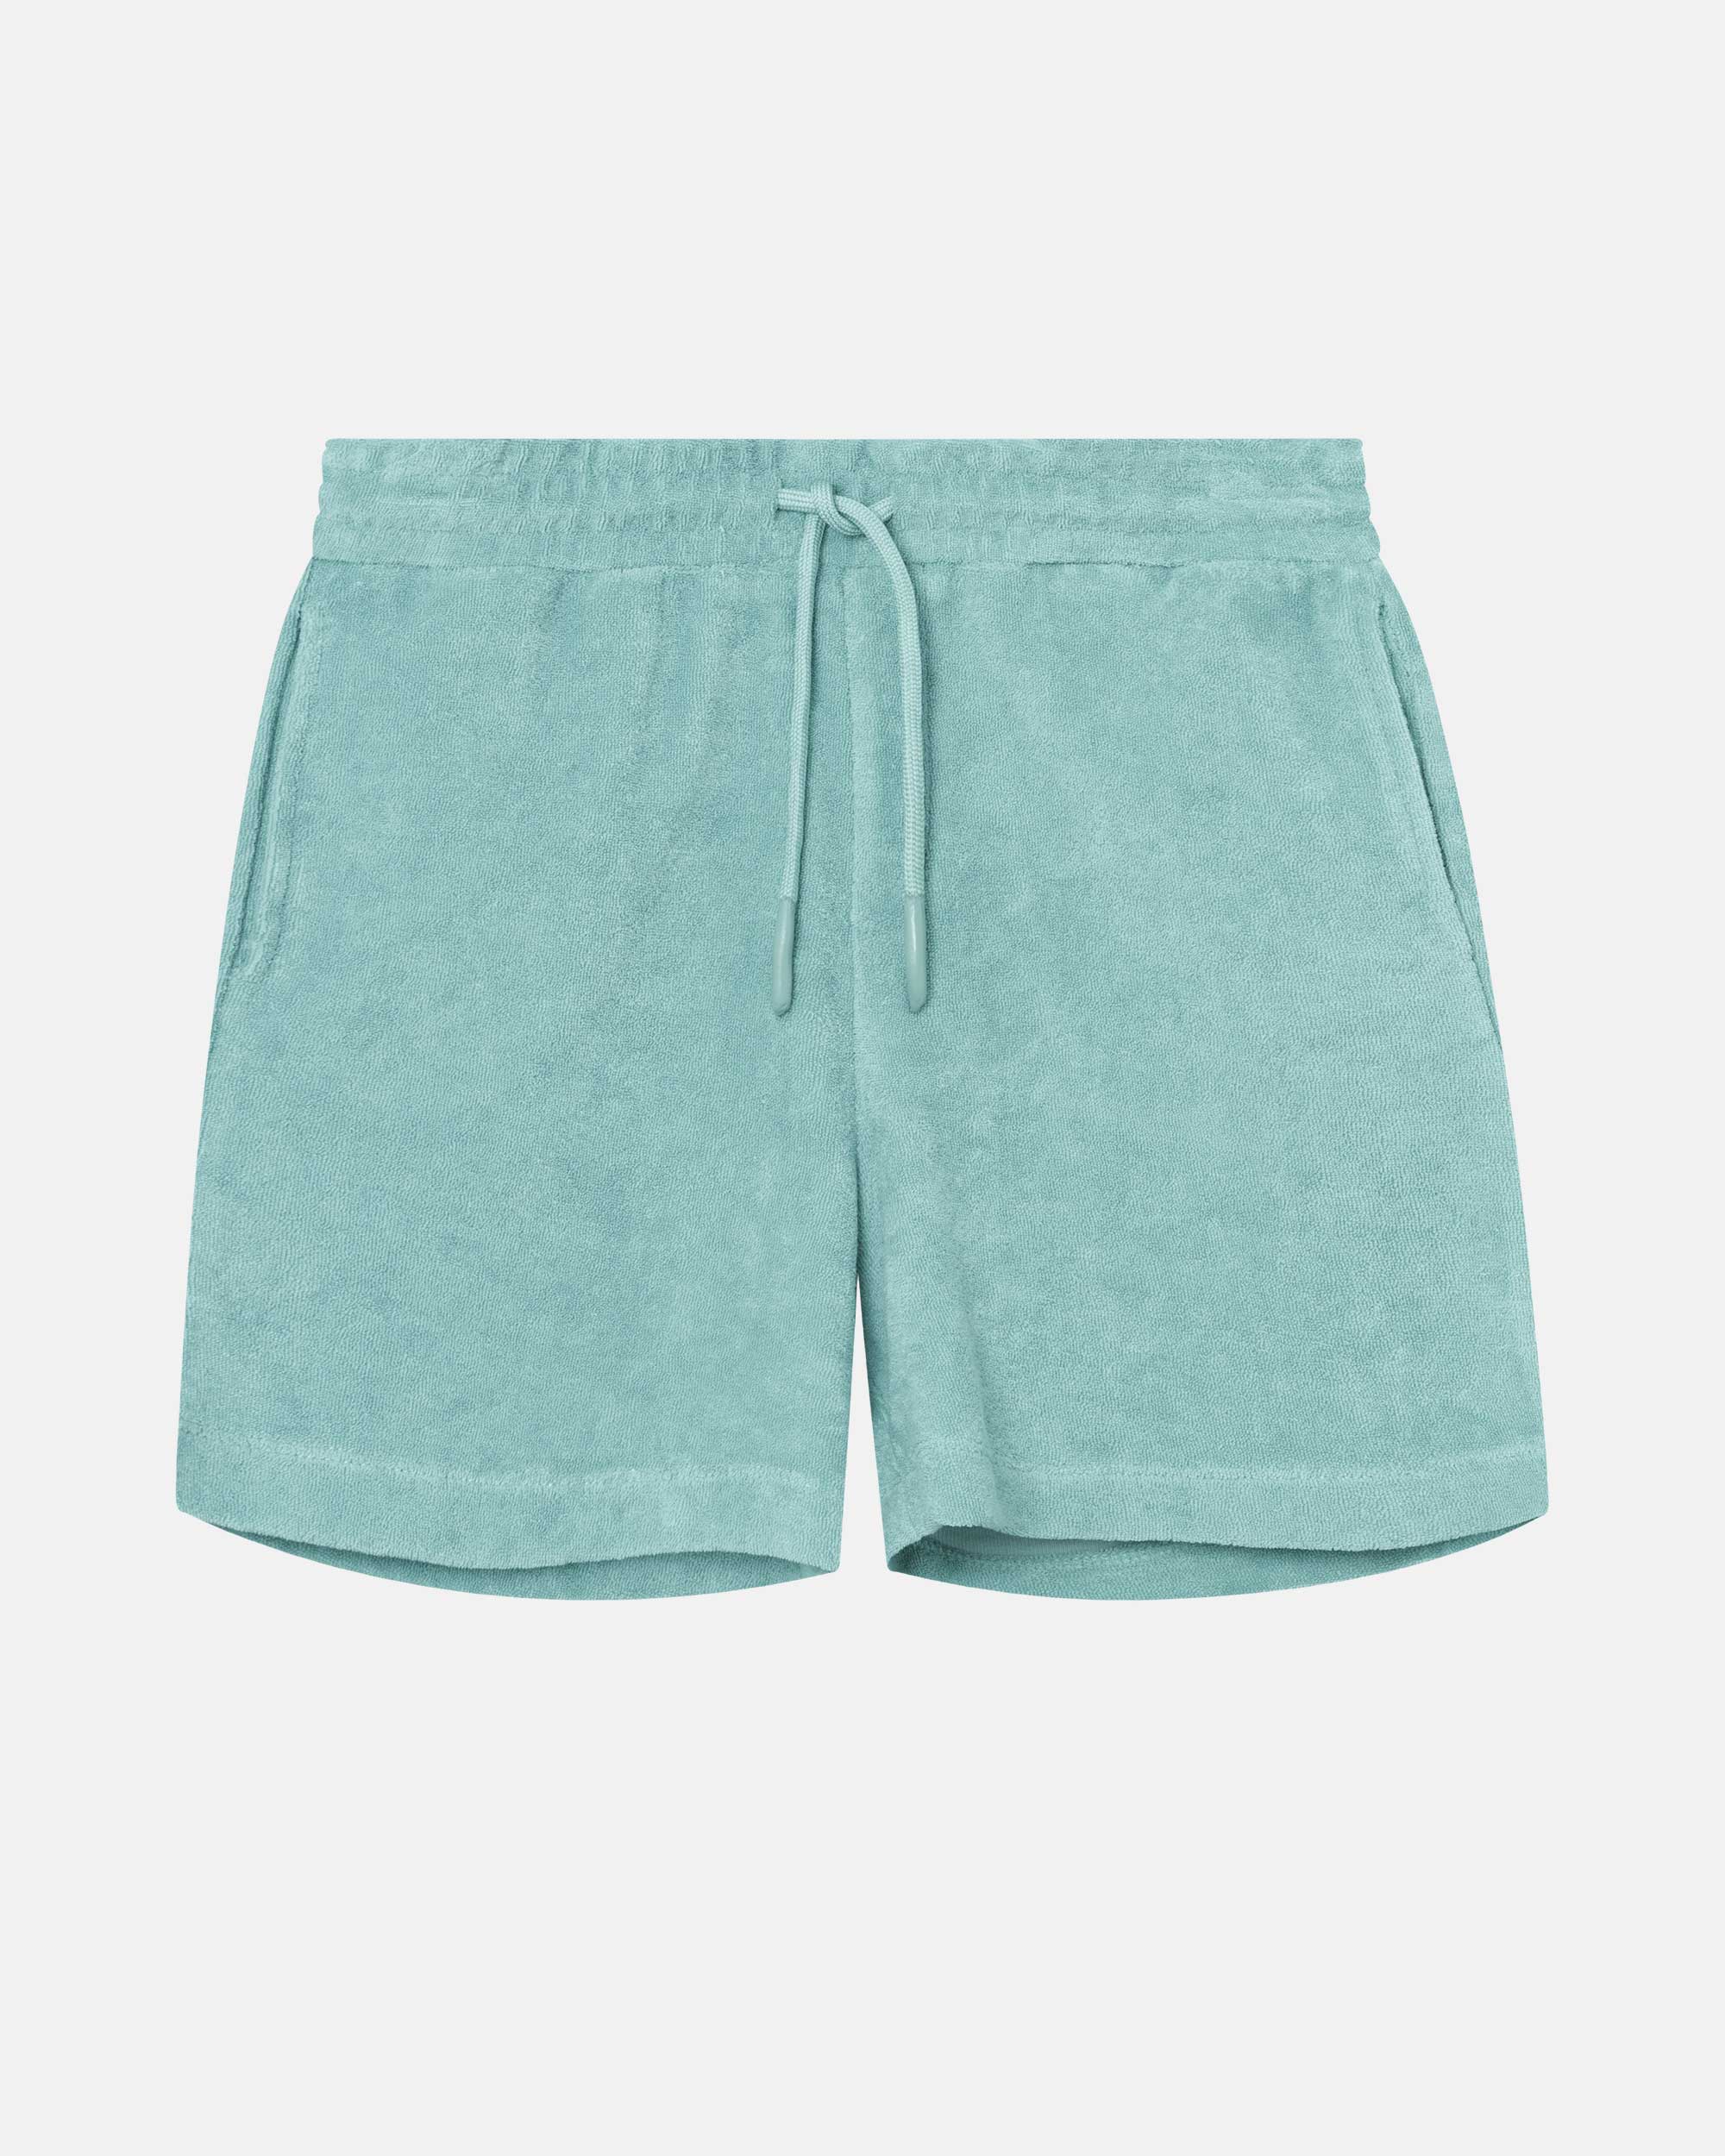 Grey-green mid length shorts in terry toweling fabric with drawdtring and two side pockets.